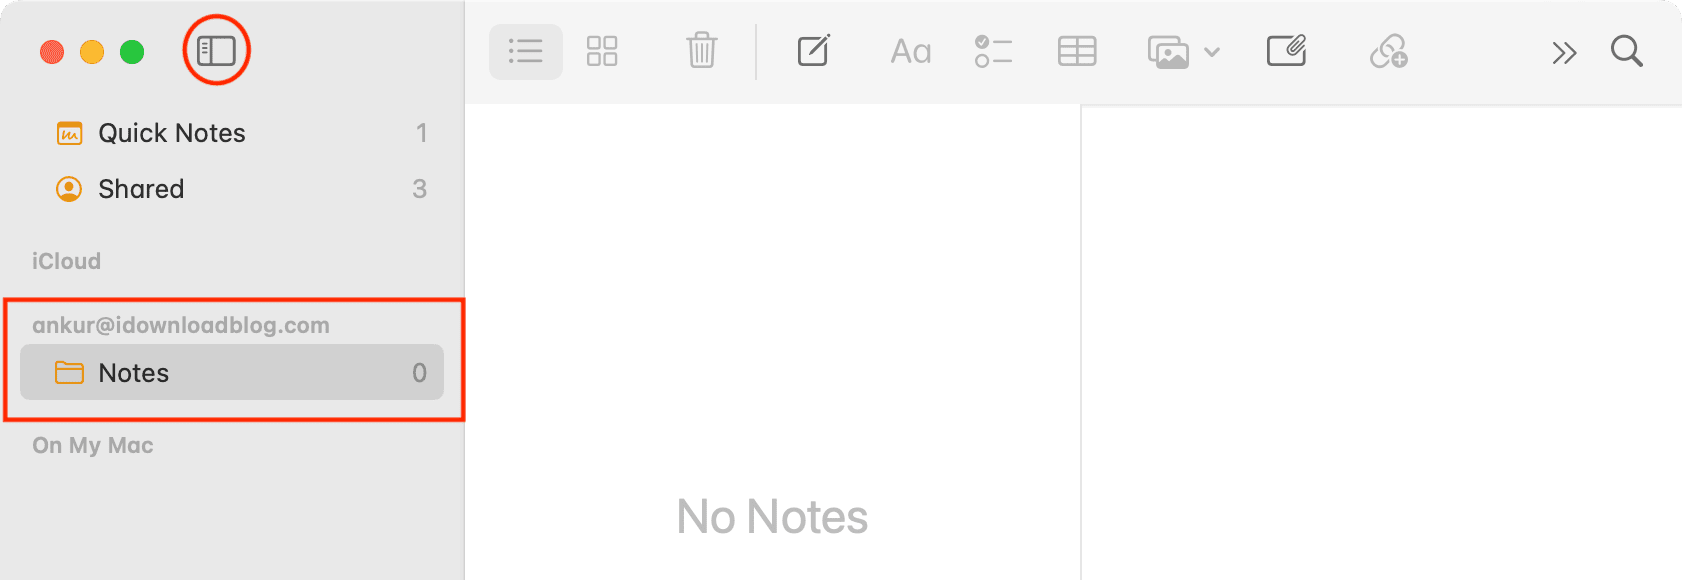 New account added to Notes app on Mac